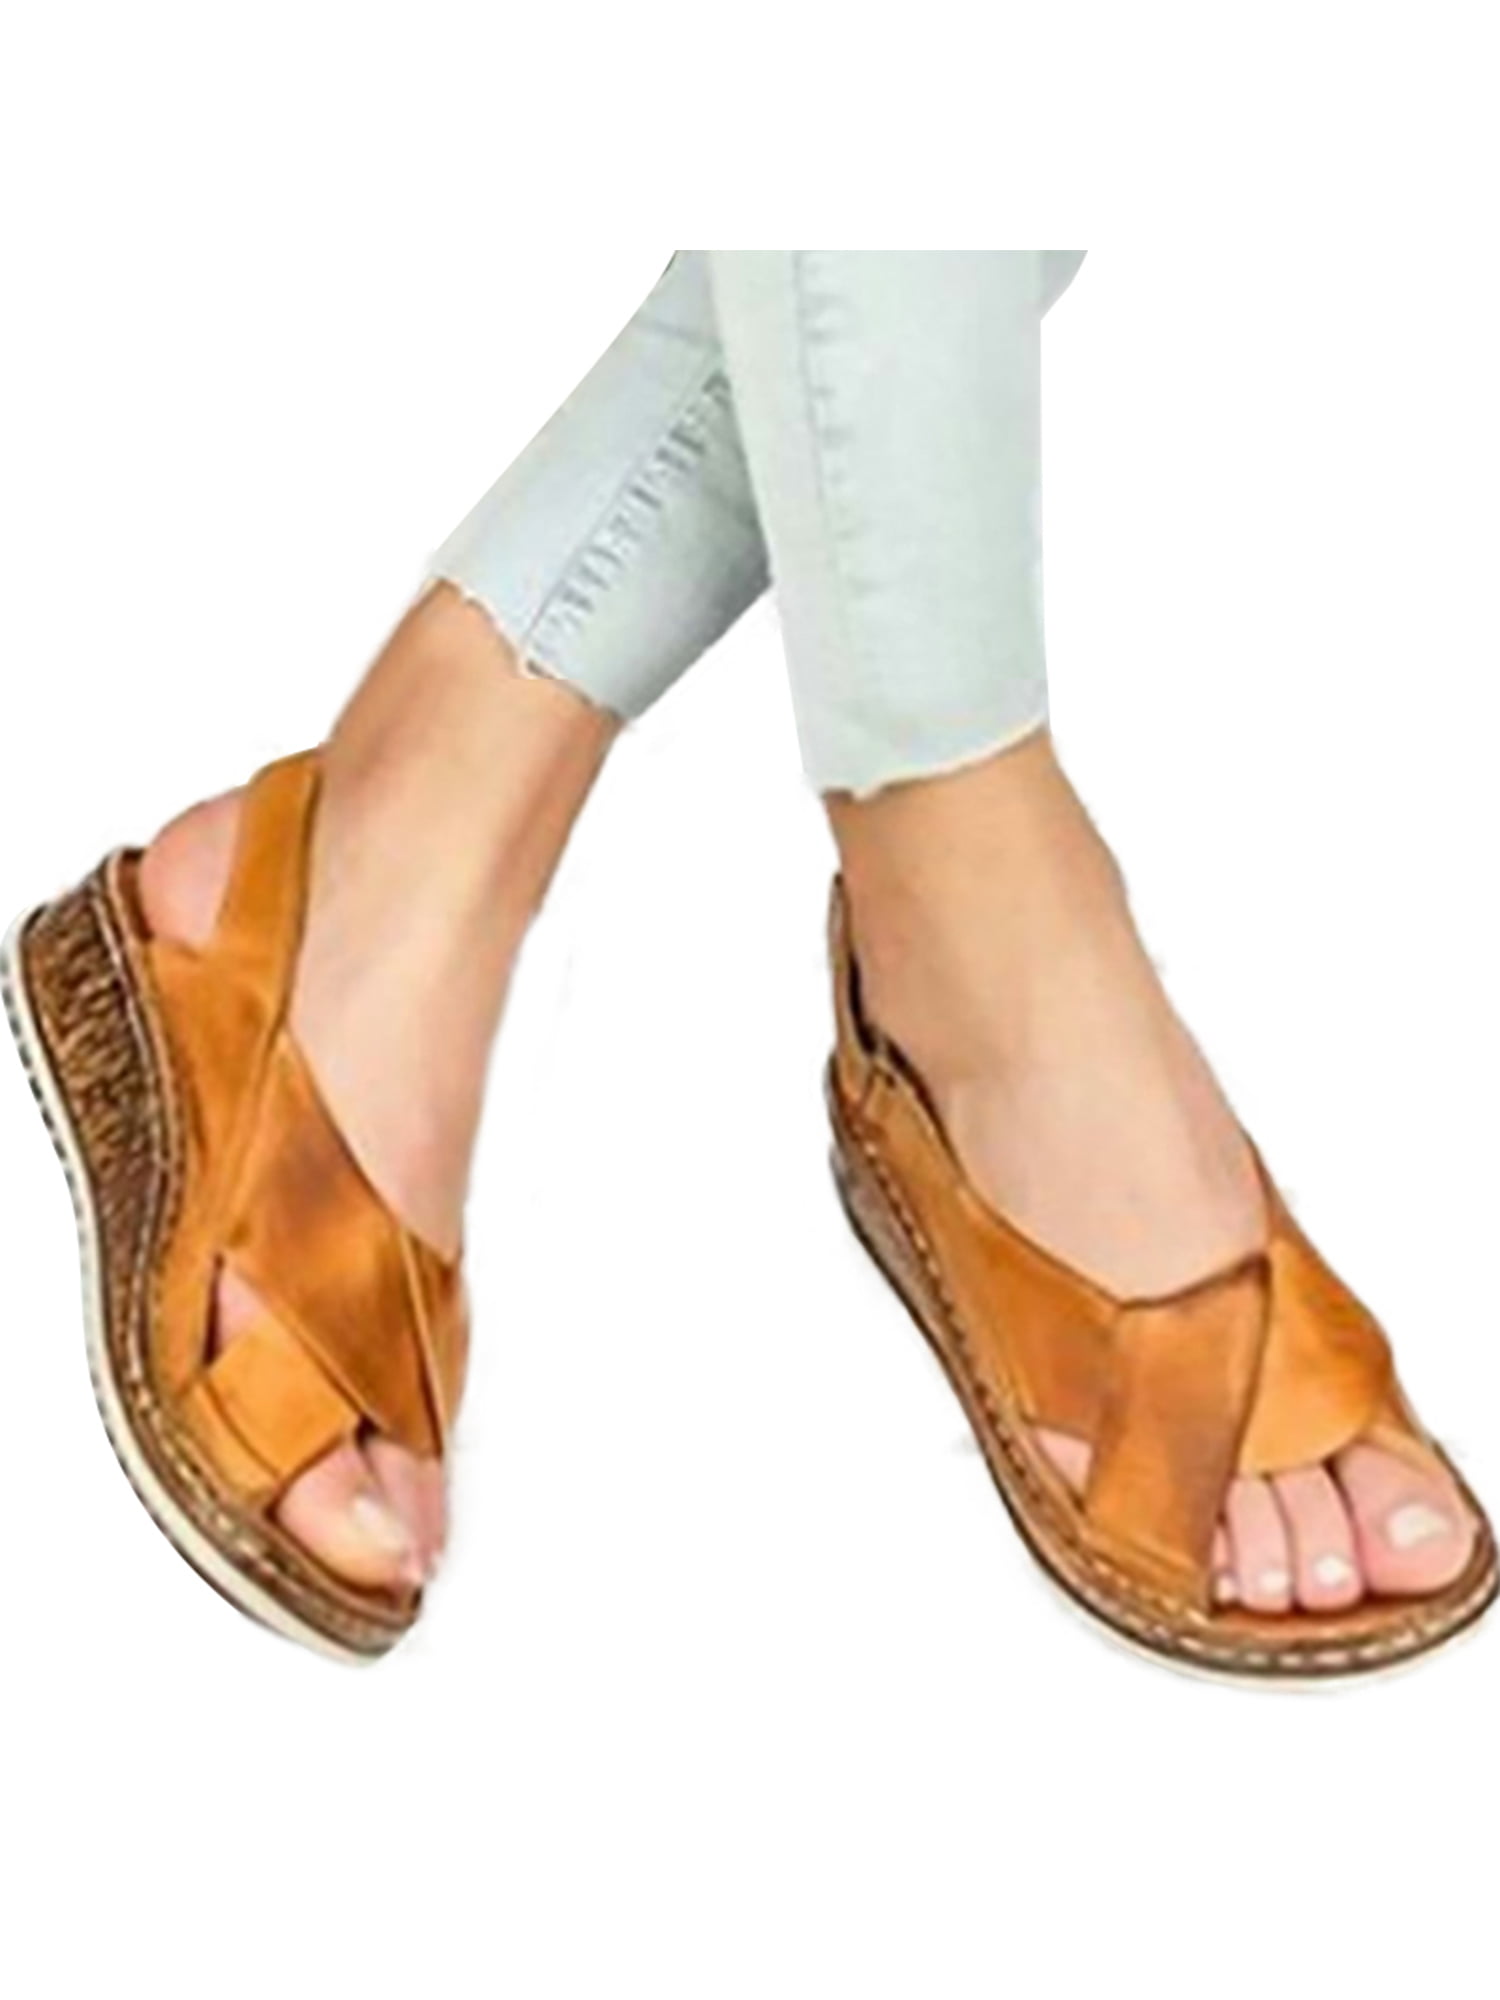 soft sole wedges